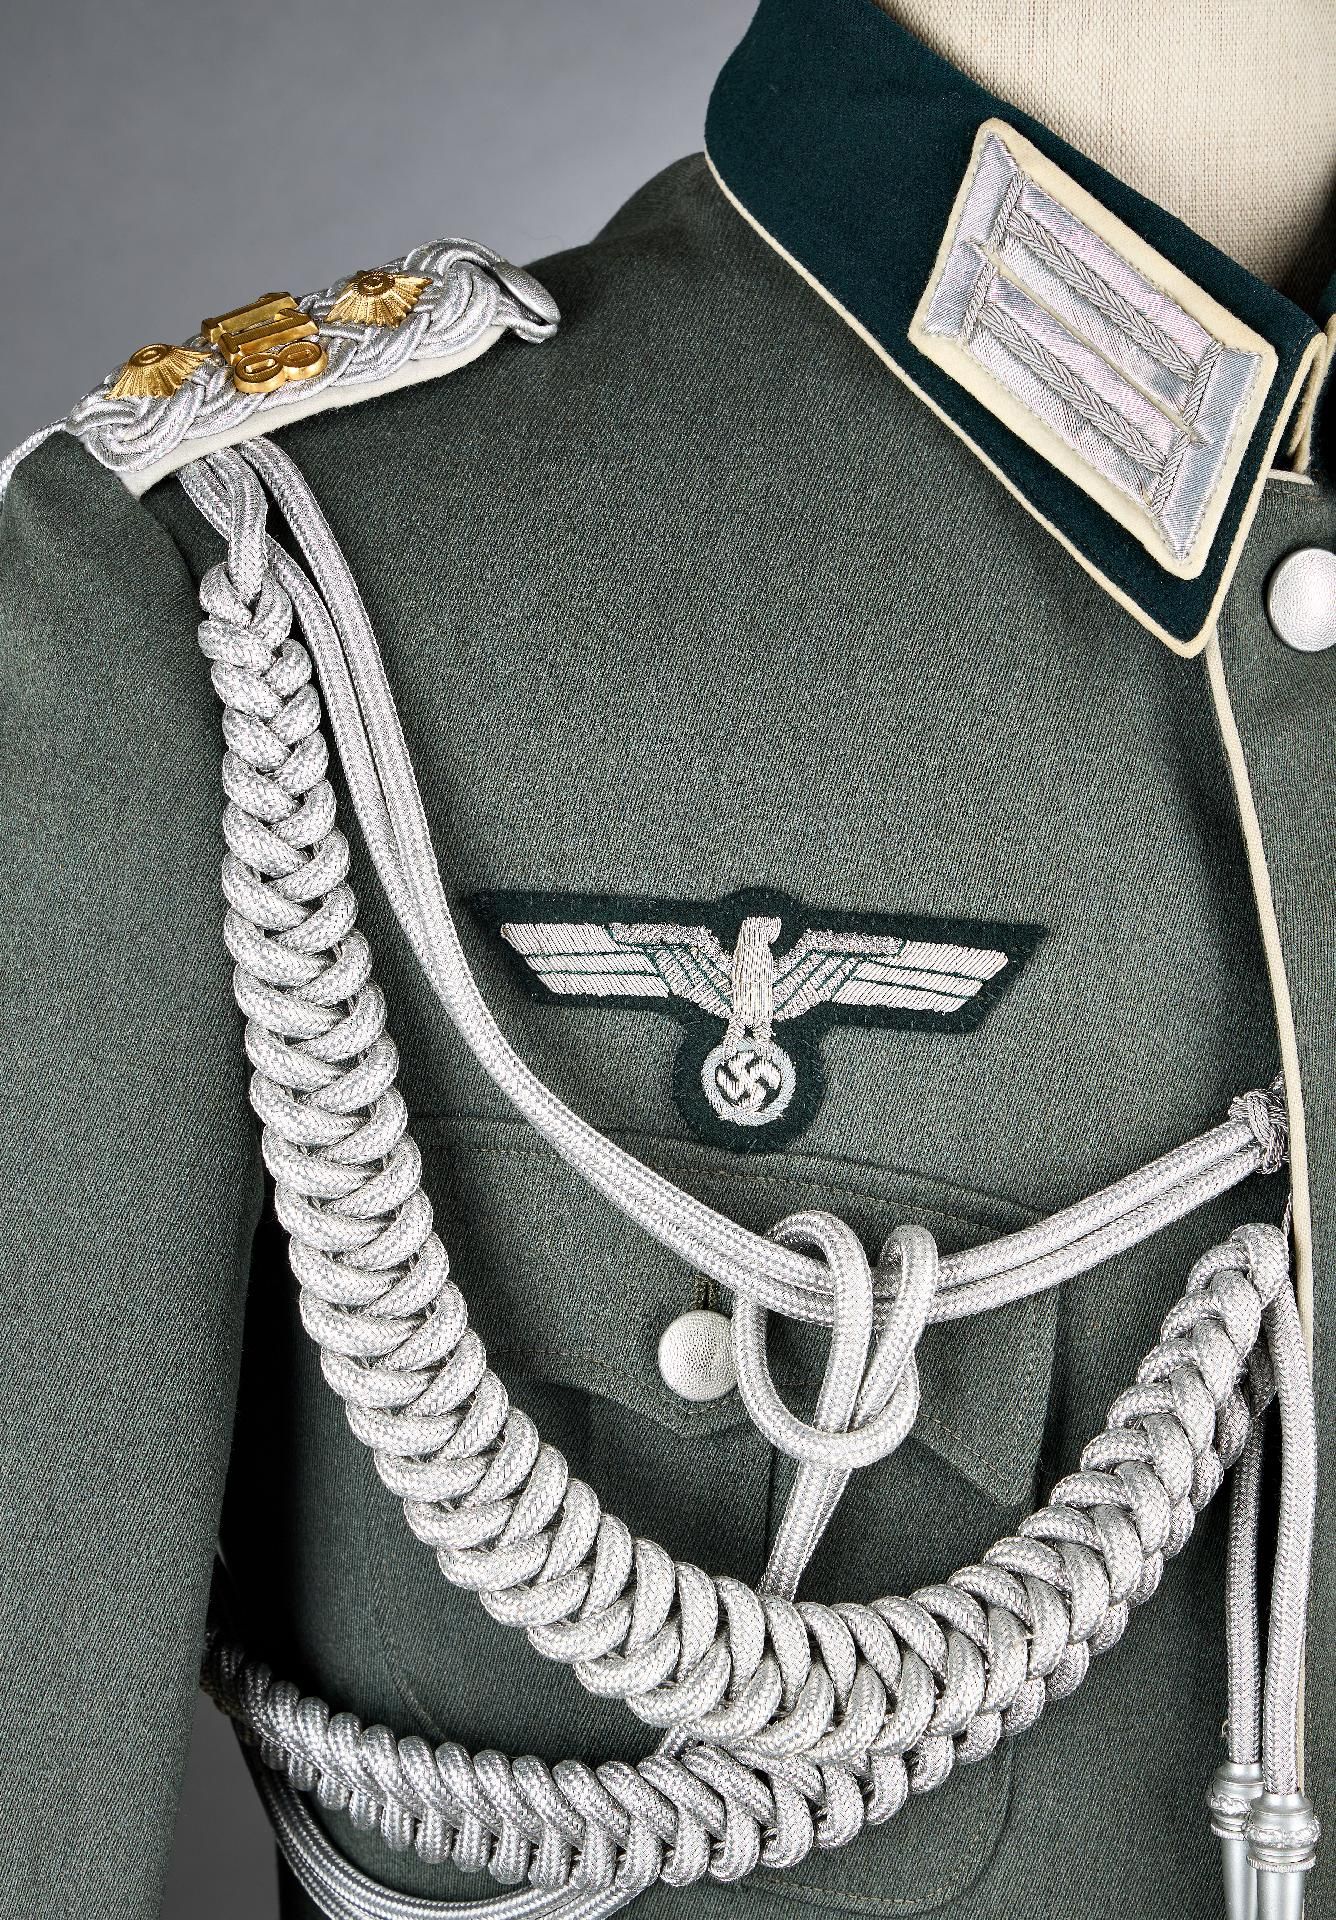 Infanterie : Tunic of an Infantry Regiment 118 Colonel. - Image 2 of 4